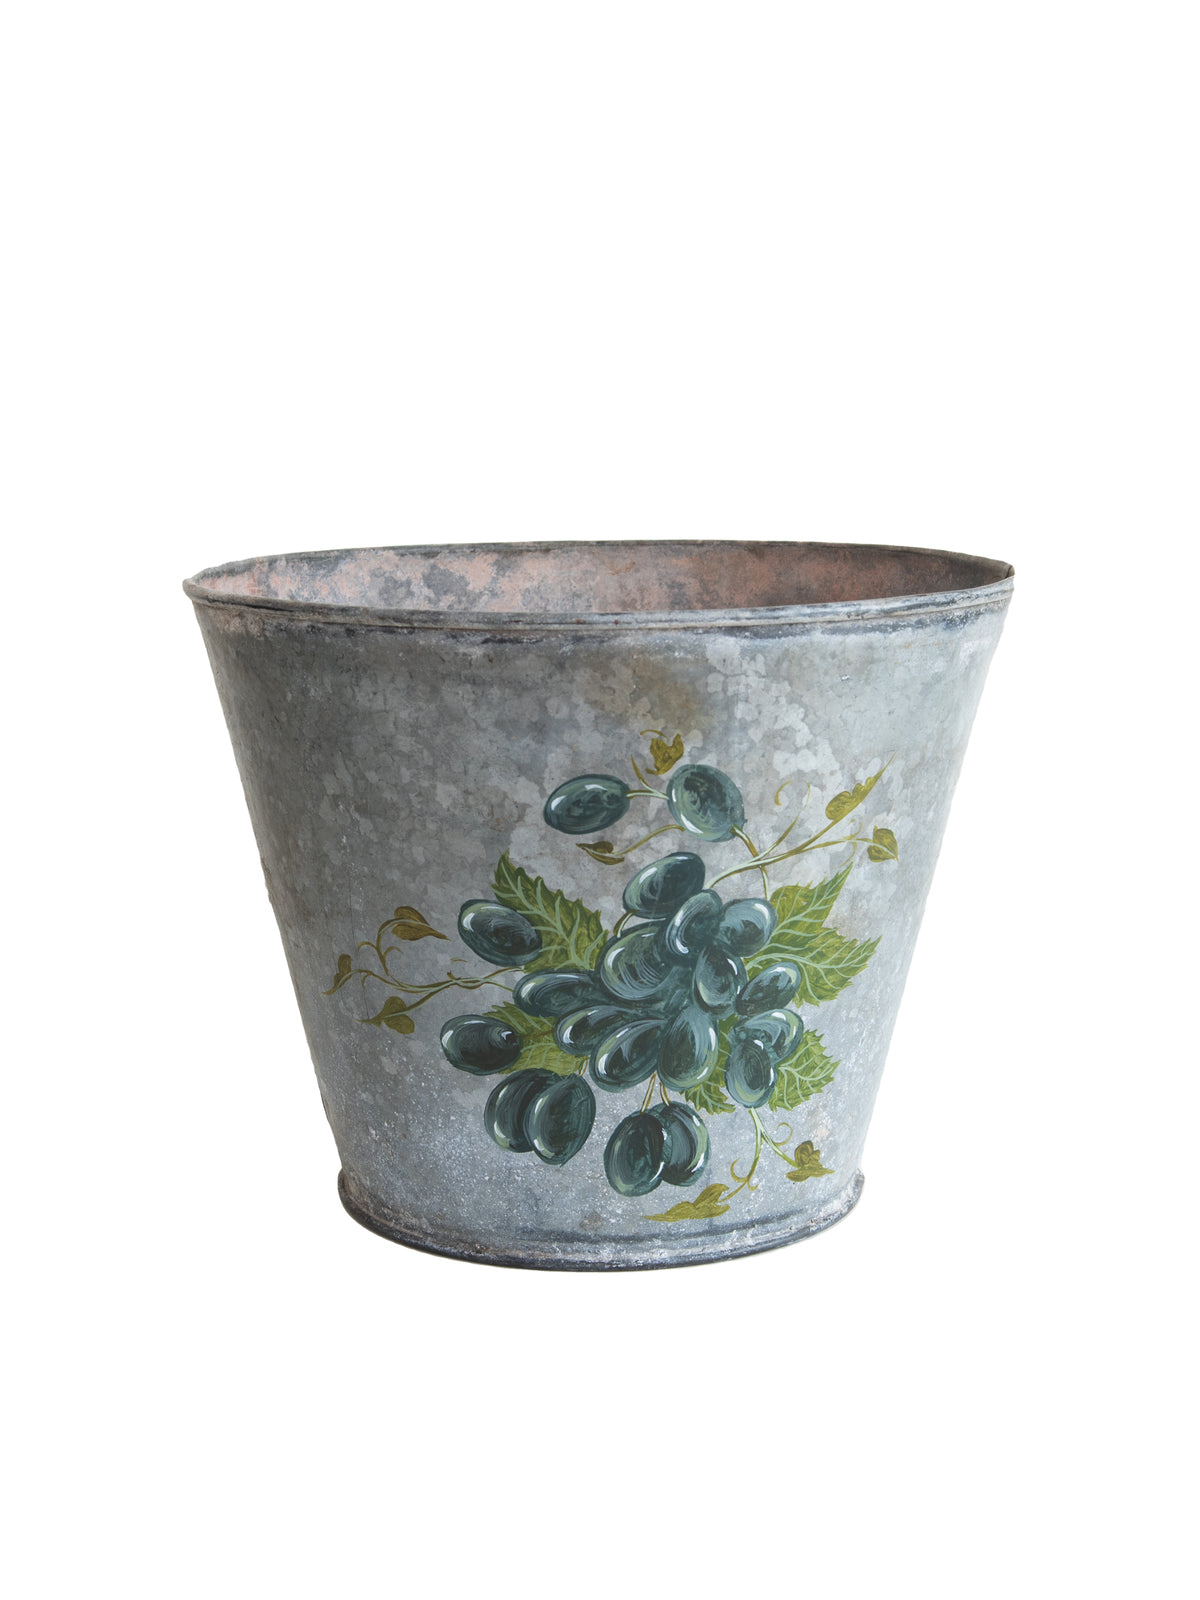 Vintage 1940s Painted English Pail